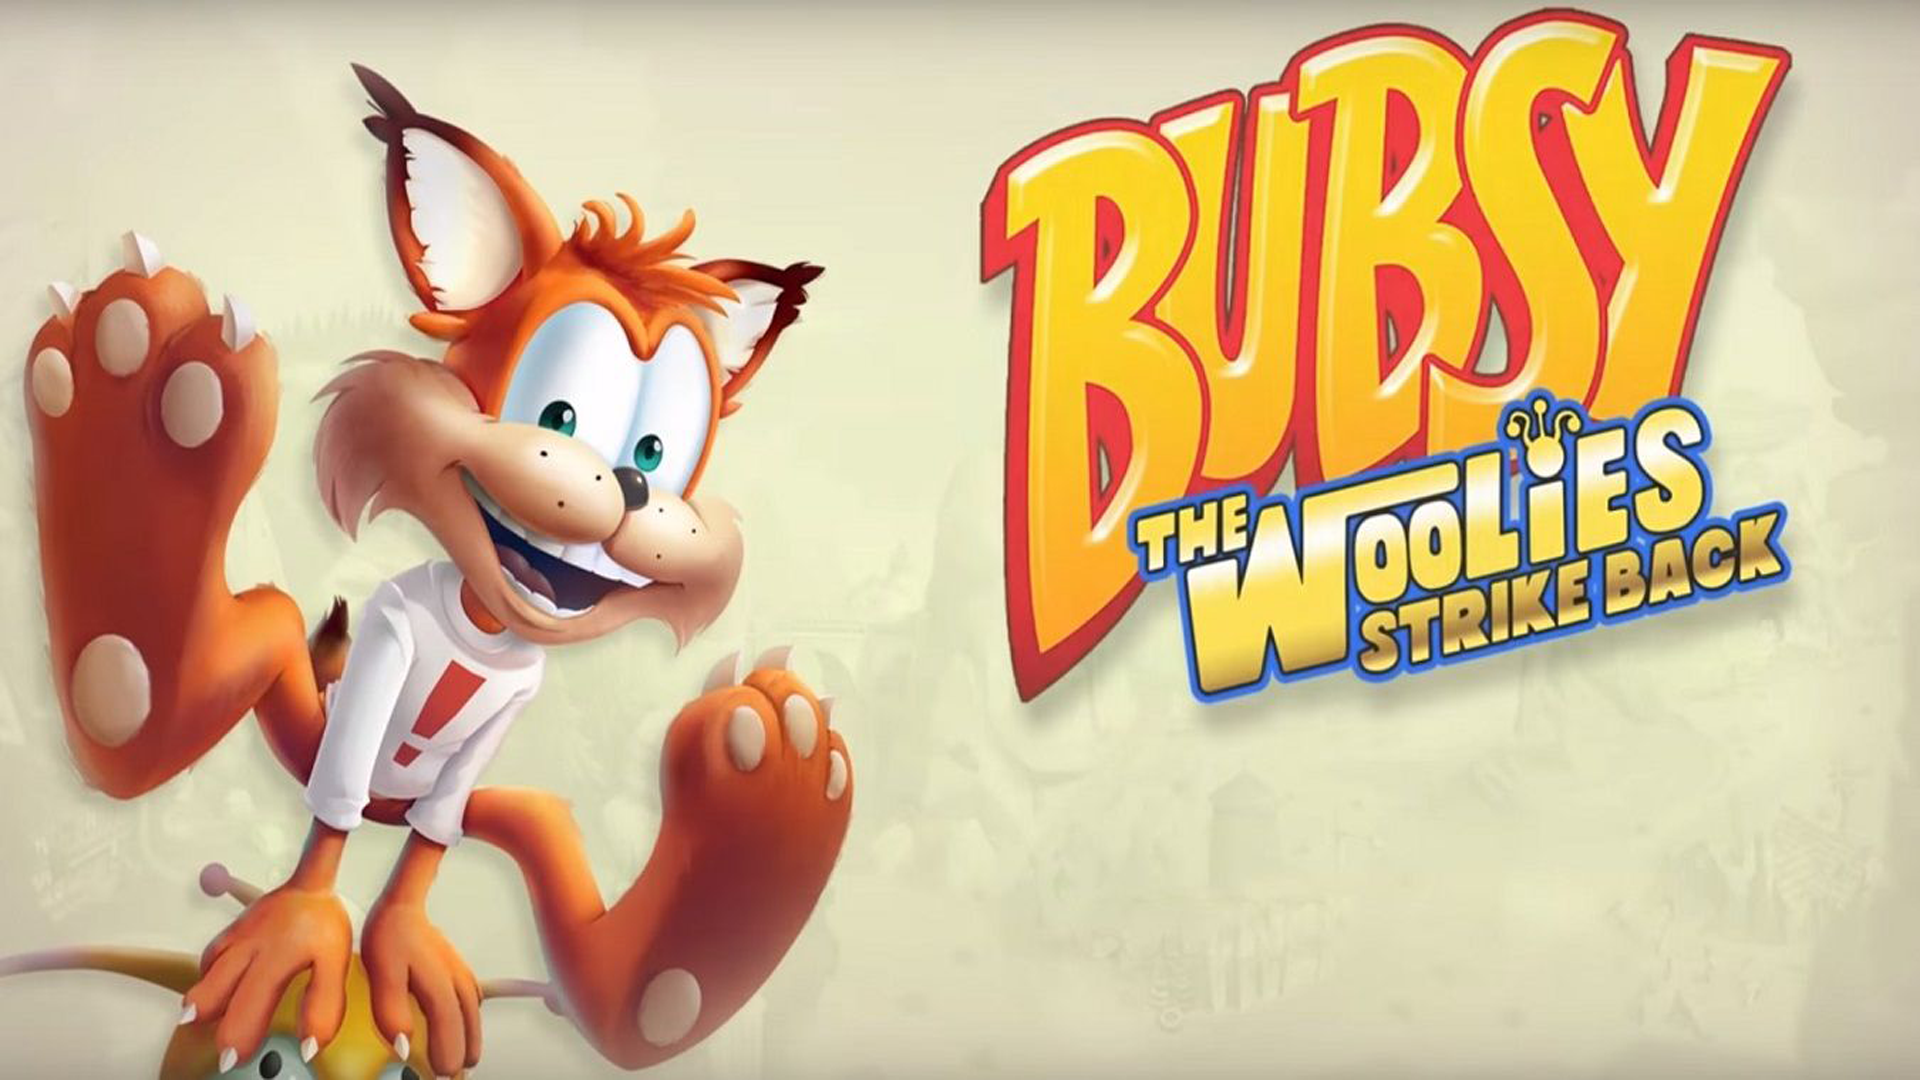 Let’s Play Bubsy: The Woolies Strike Back